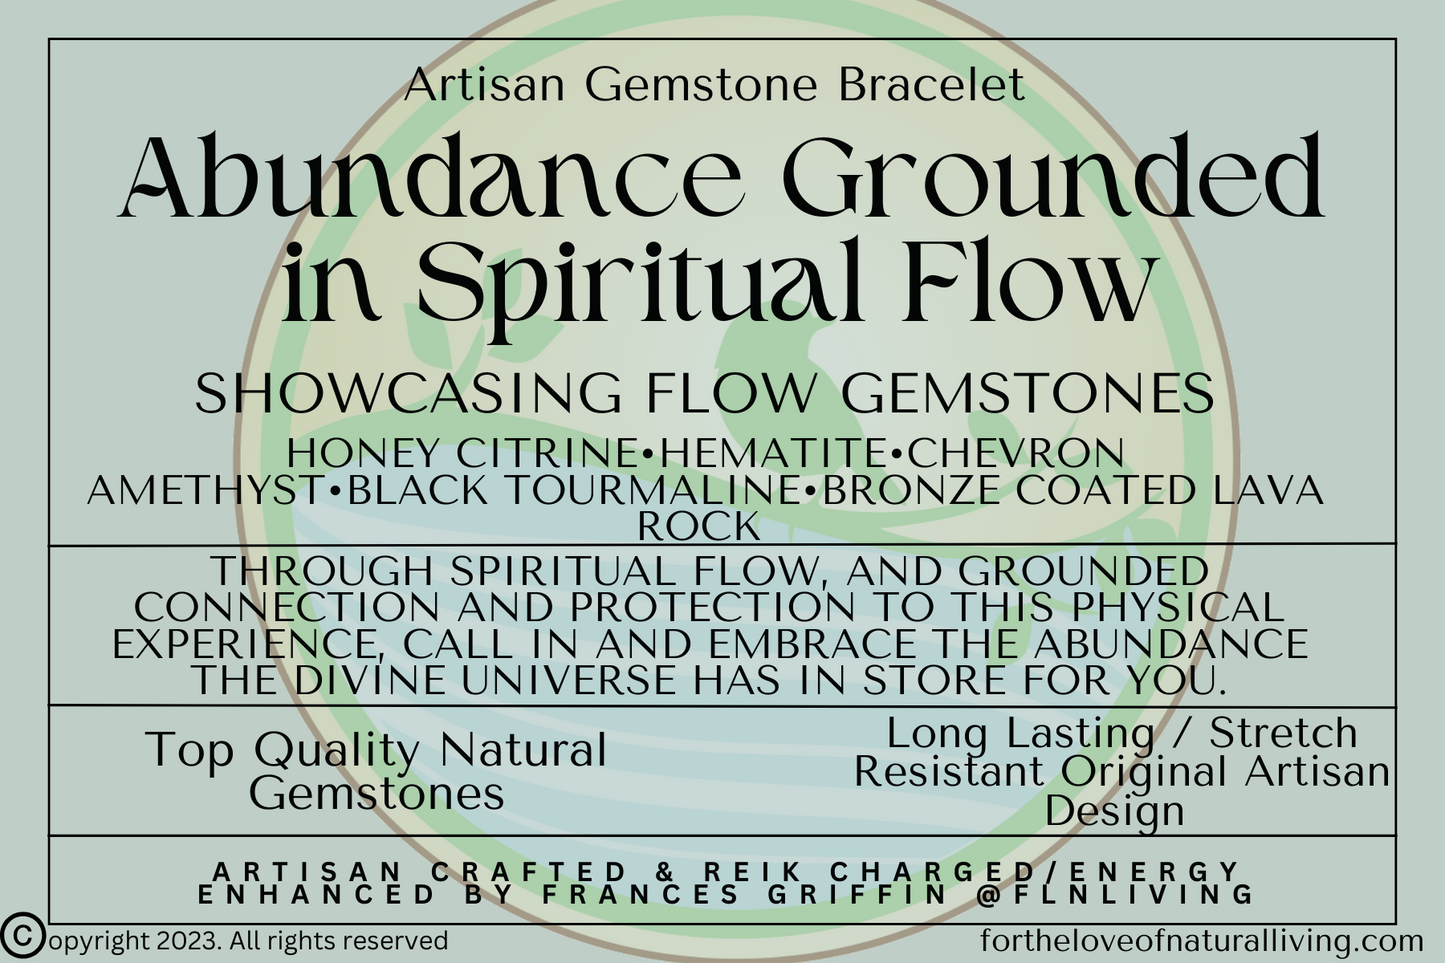 Abundance Grounded in Spiritual Flow - For the Love of Natural Living, LLC 